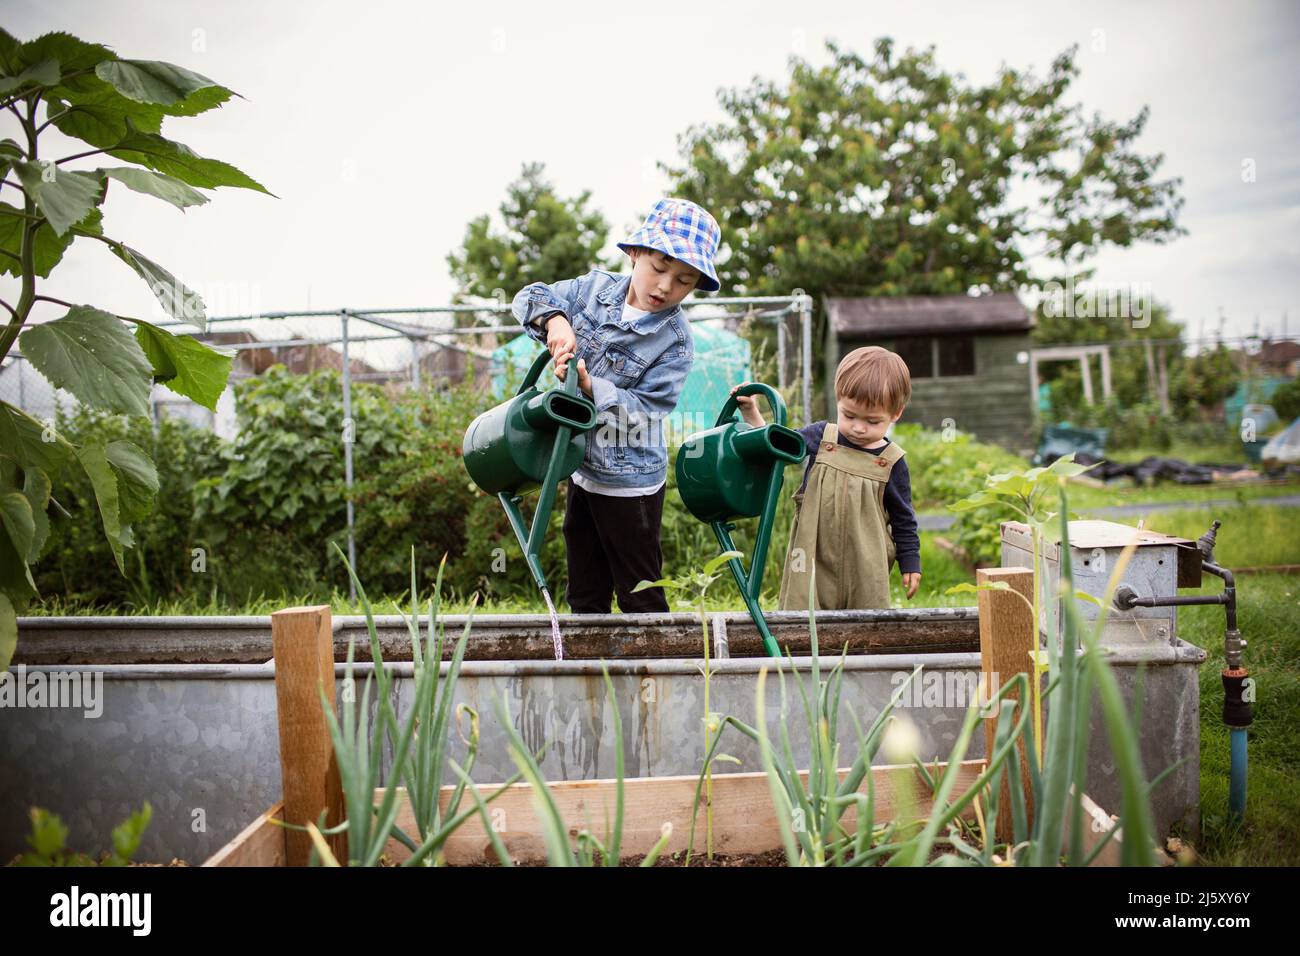 Brothers pouring water from watering cans in garden Stock Photo